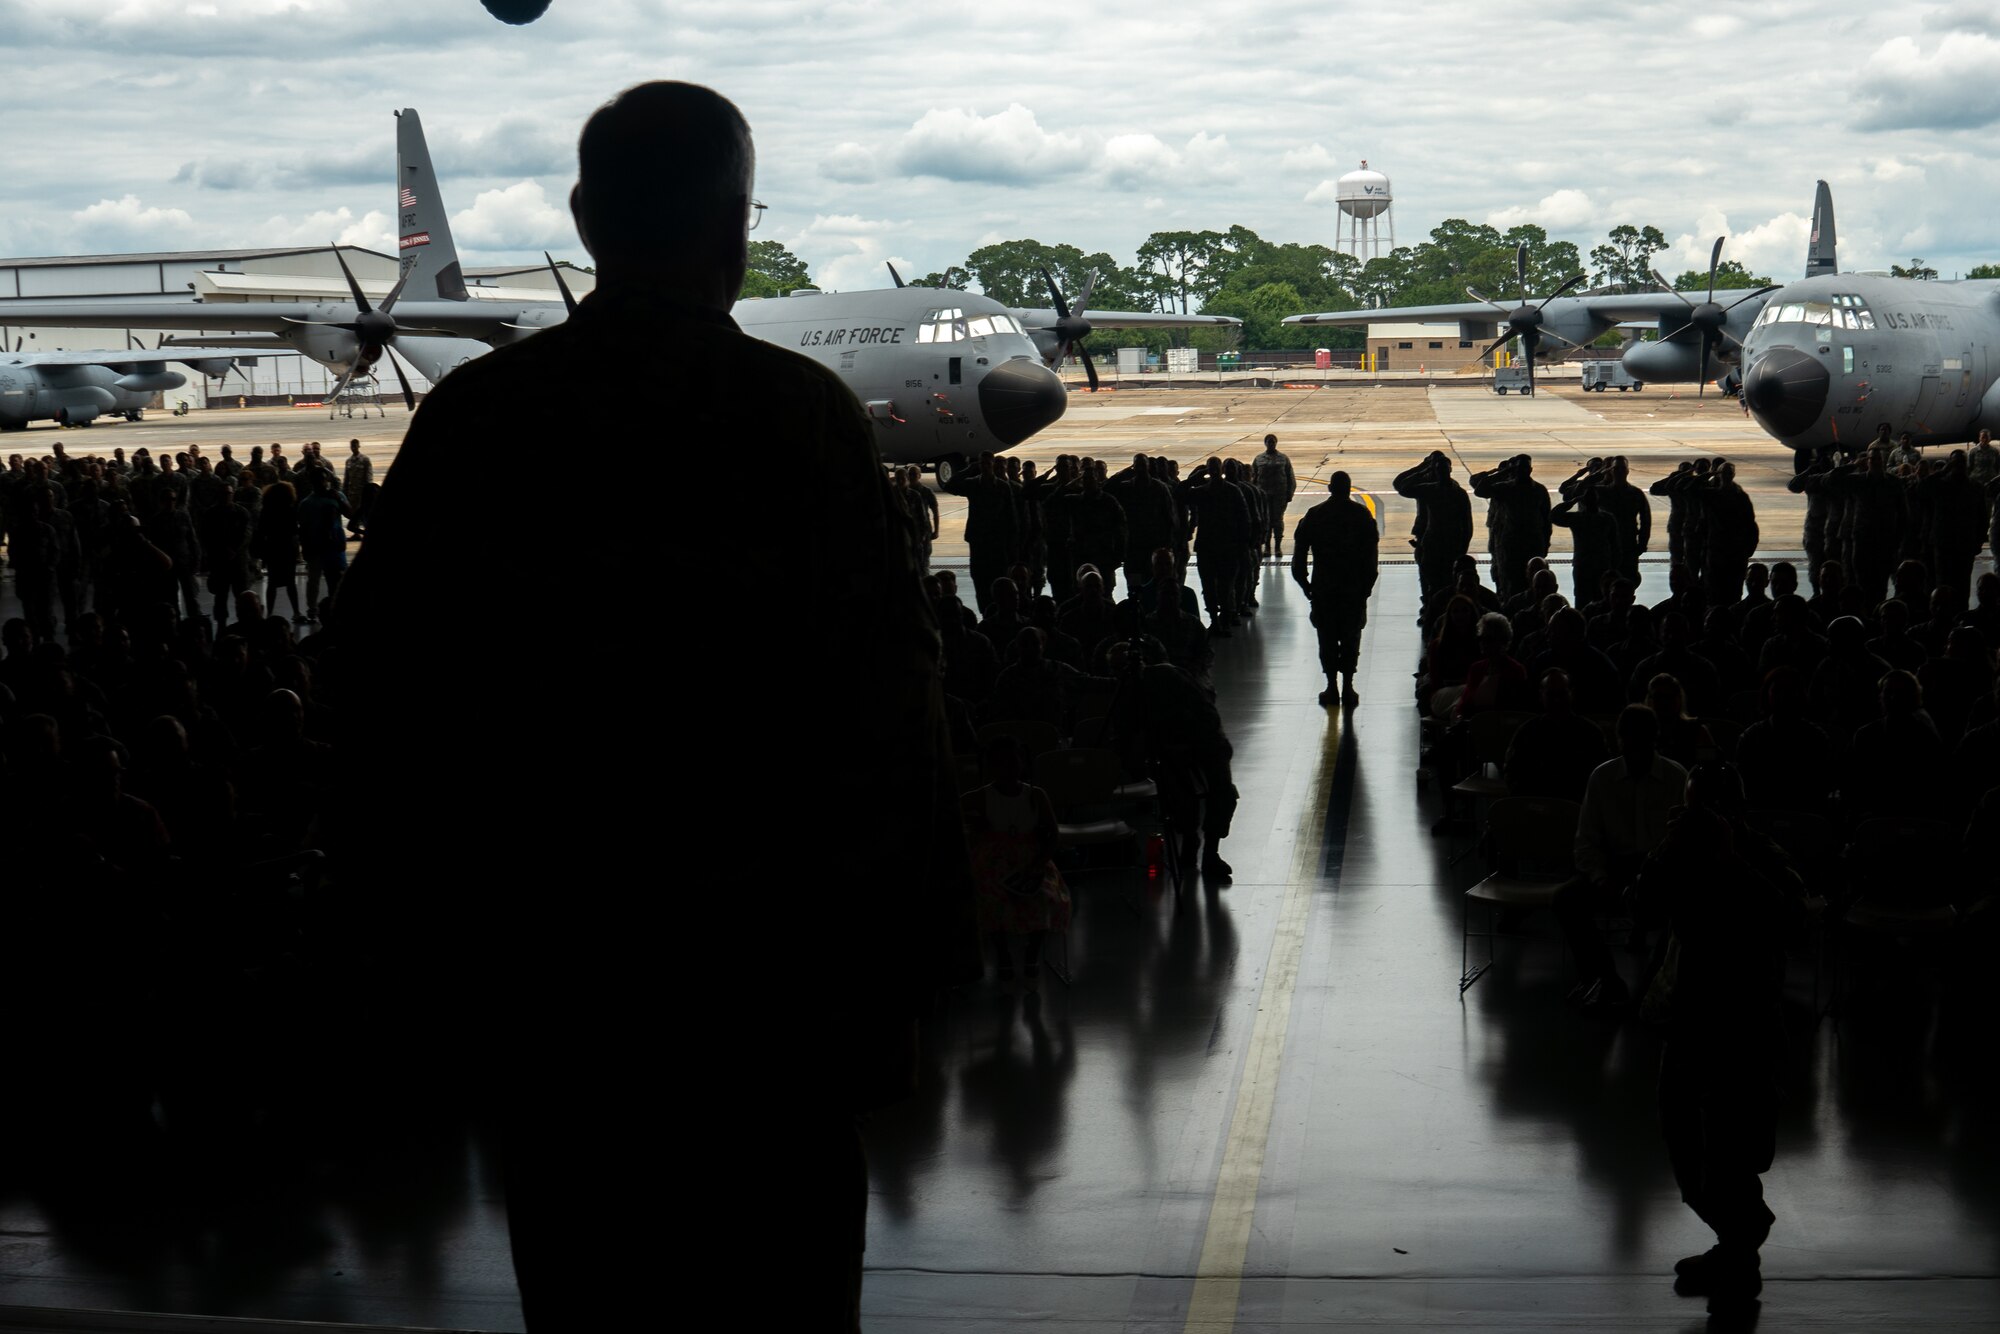 Reserve Citizen Airmen, family and friends welcome the new commander during the 403rd Wing Change of Command Ceremony June 9, 2019, at Keesler Air Force Base, Mississippi. (U.S. Air Force photo by Staff Sgt. Shelton Sherrill)